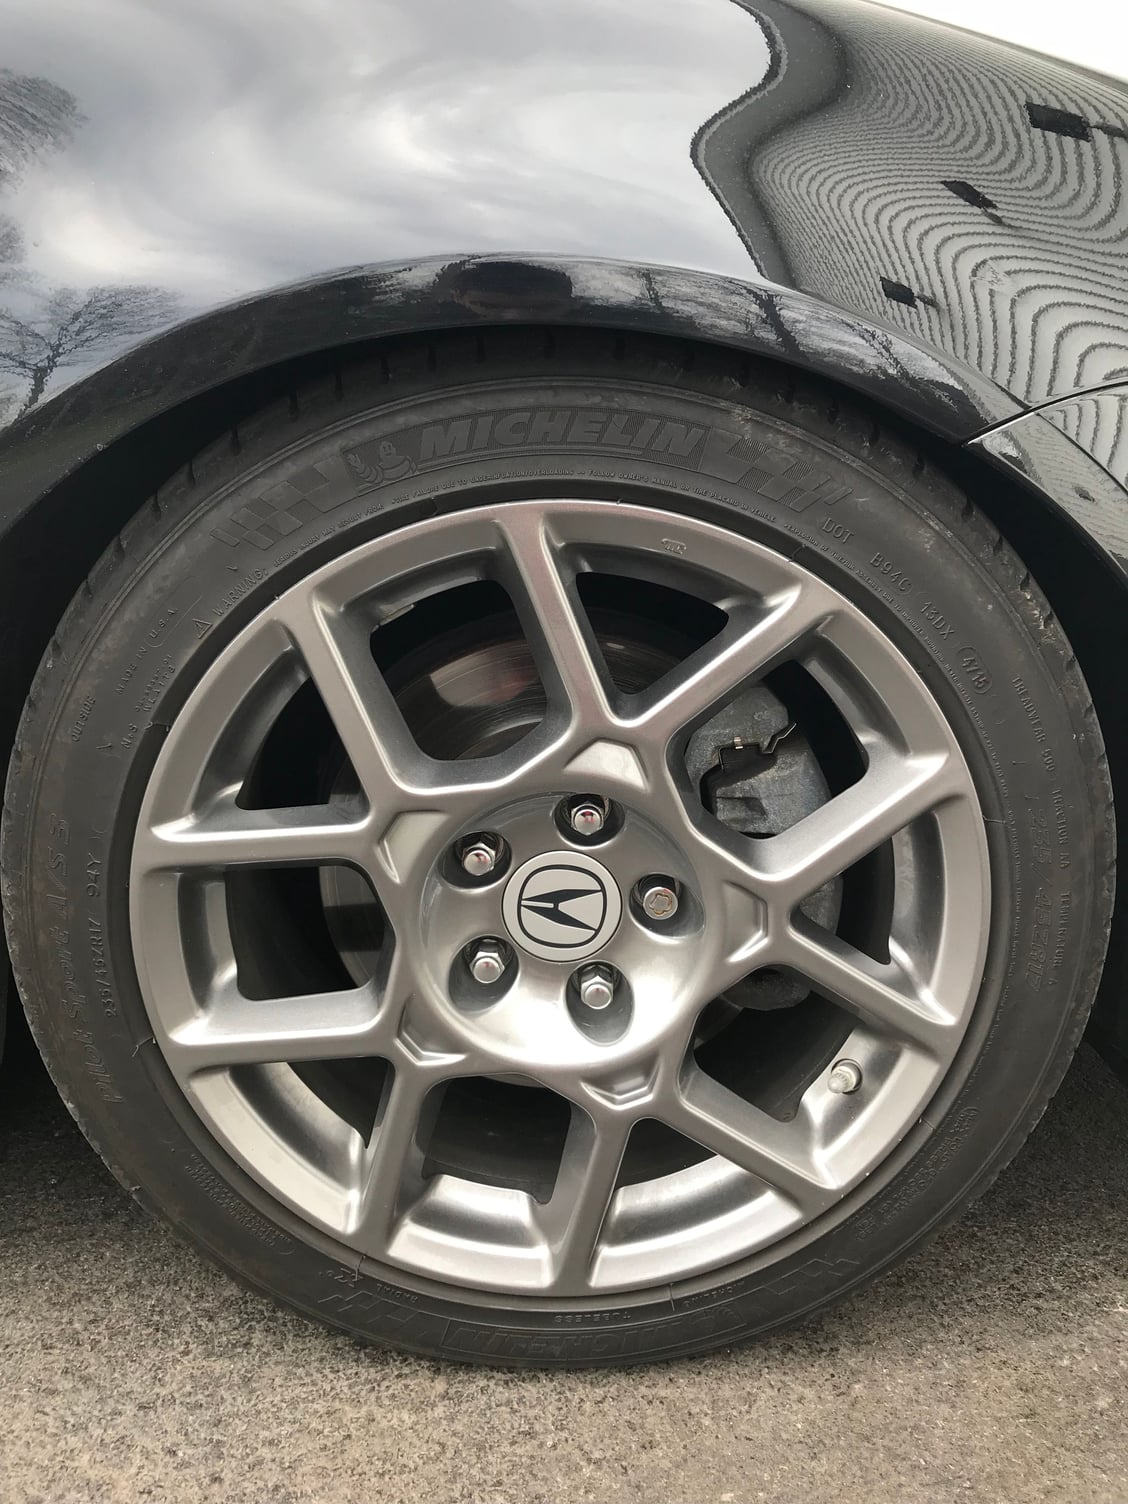 Wheels and Tires/Axles - SOLD: Type S OEM wheels "Waffles" with NO curb rash! Like New - Used - 2004 to 2008 Acura TL - 2004 to 2008 Acura TSX - Monroe, NY 10950, United States